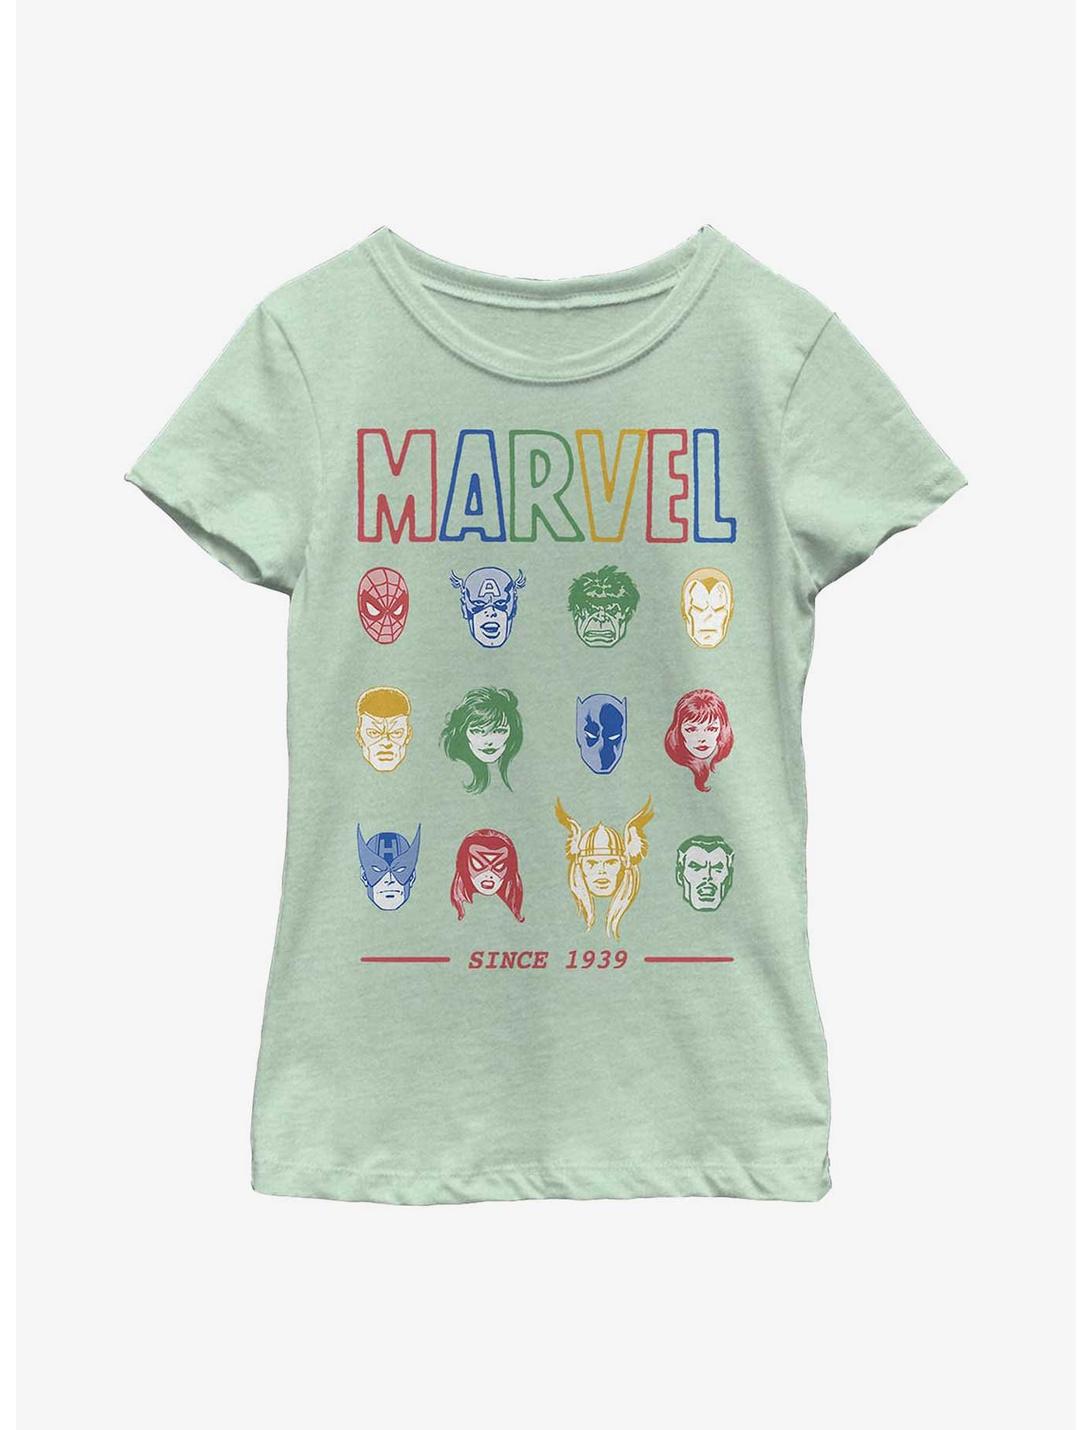 Marvel Avengers Faces Youth Girls T-Shirt, MINT, hi-res